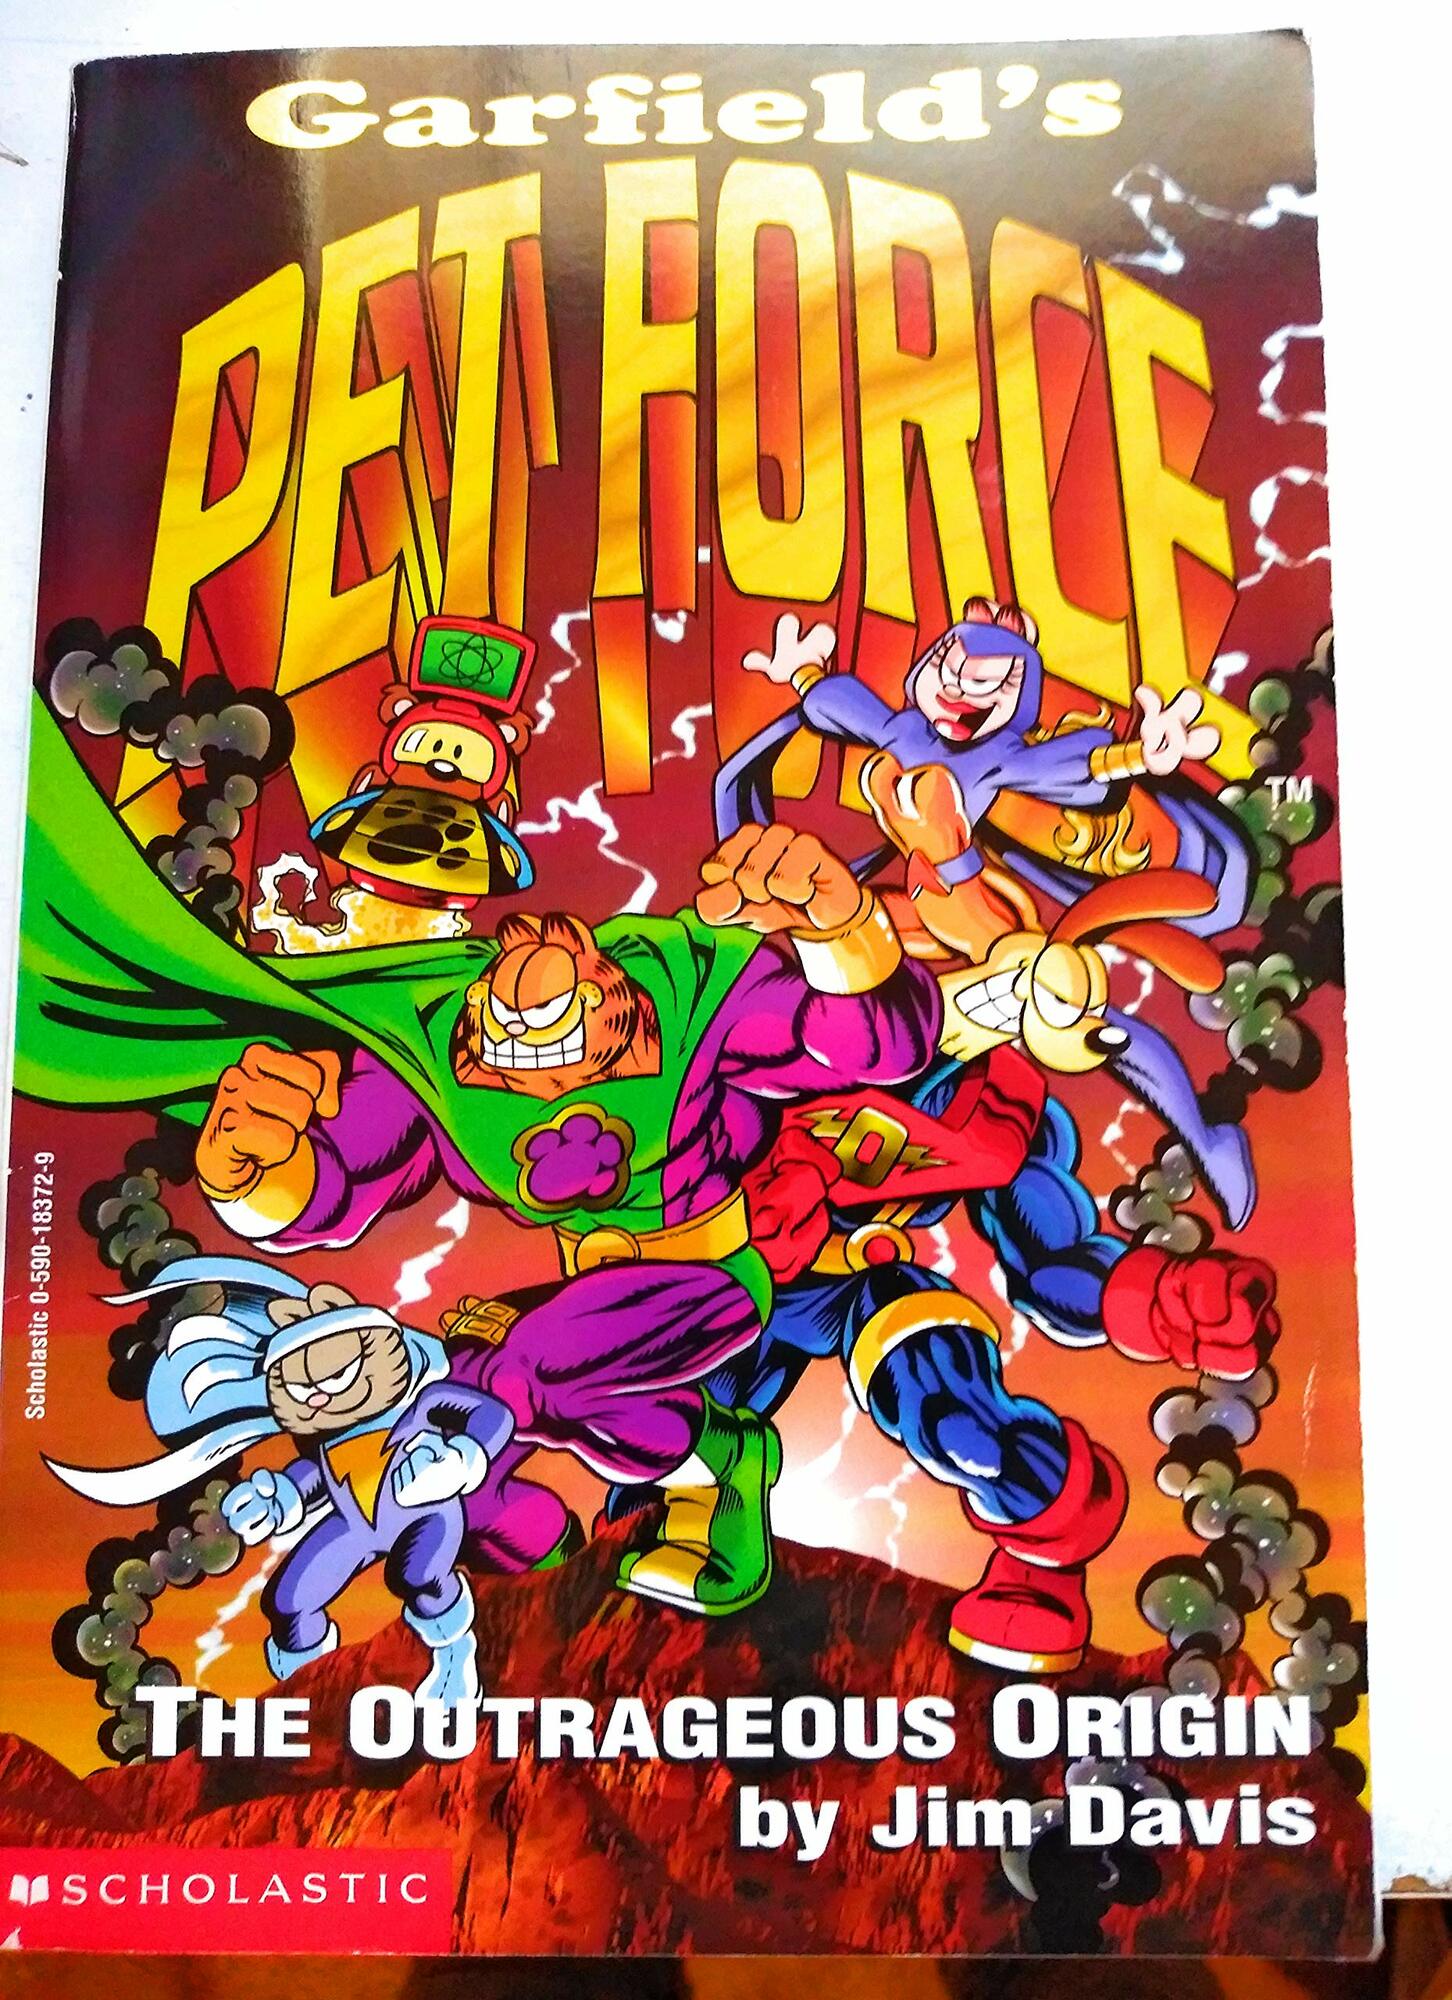 Night of the Crabs Garfield Pet Force cover